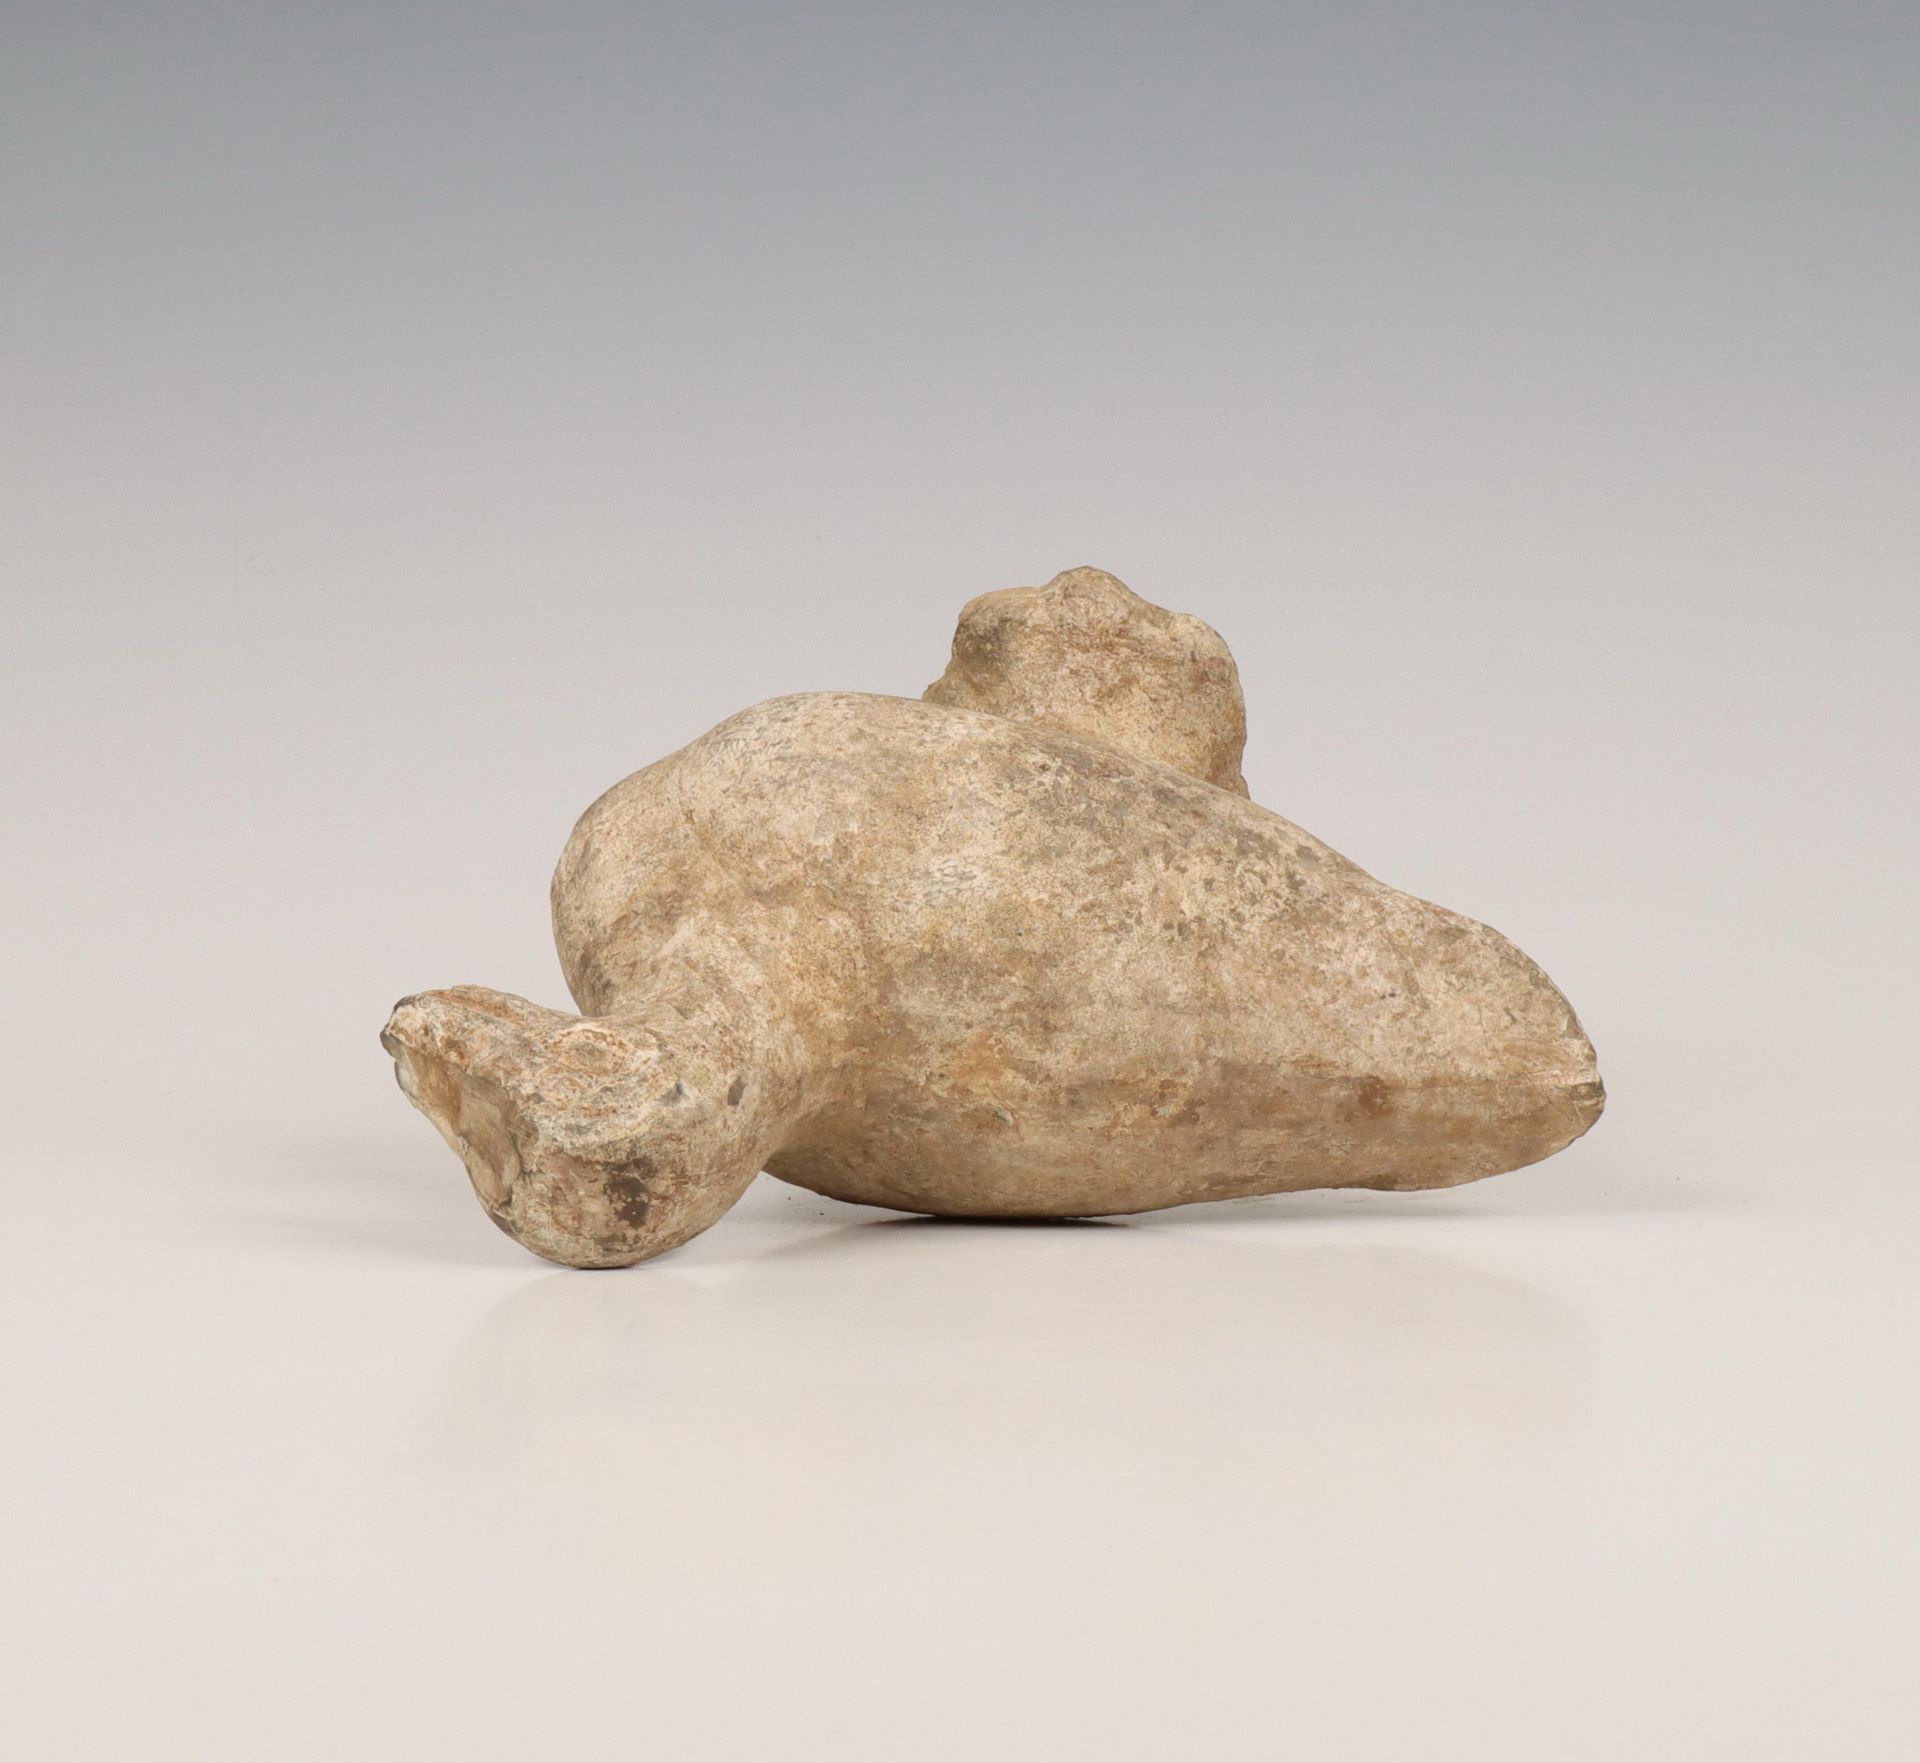 China, grey pottery model of a duck, probably Han dynasty (206 BC-220 AD), - Image 4 of 6